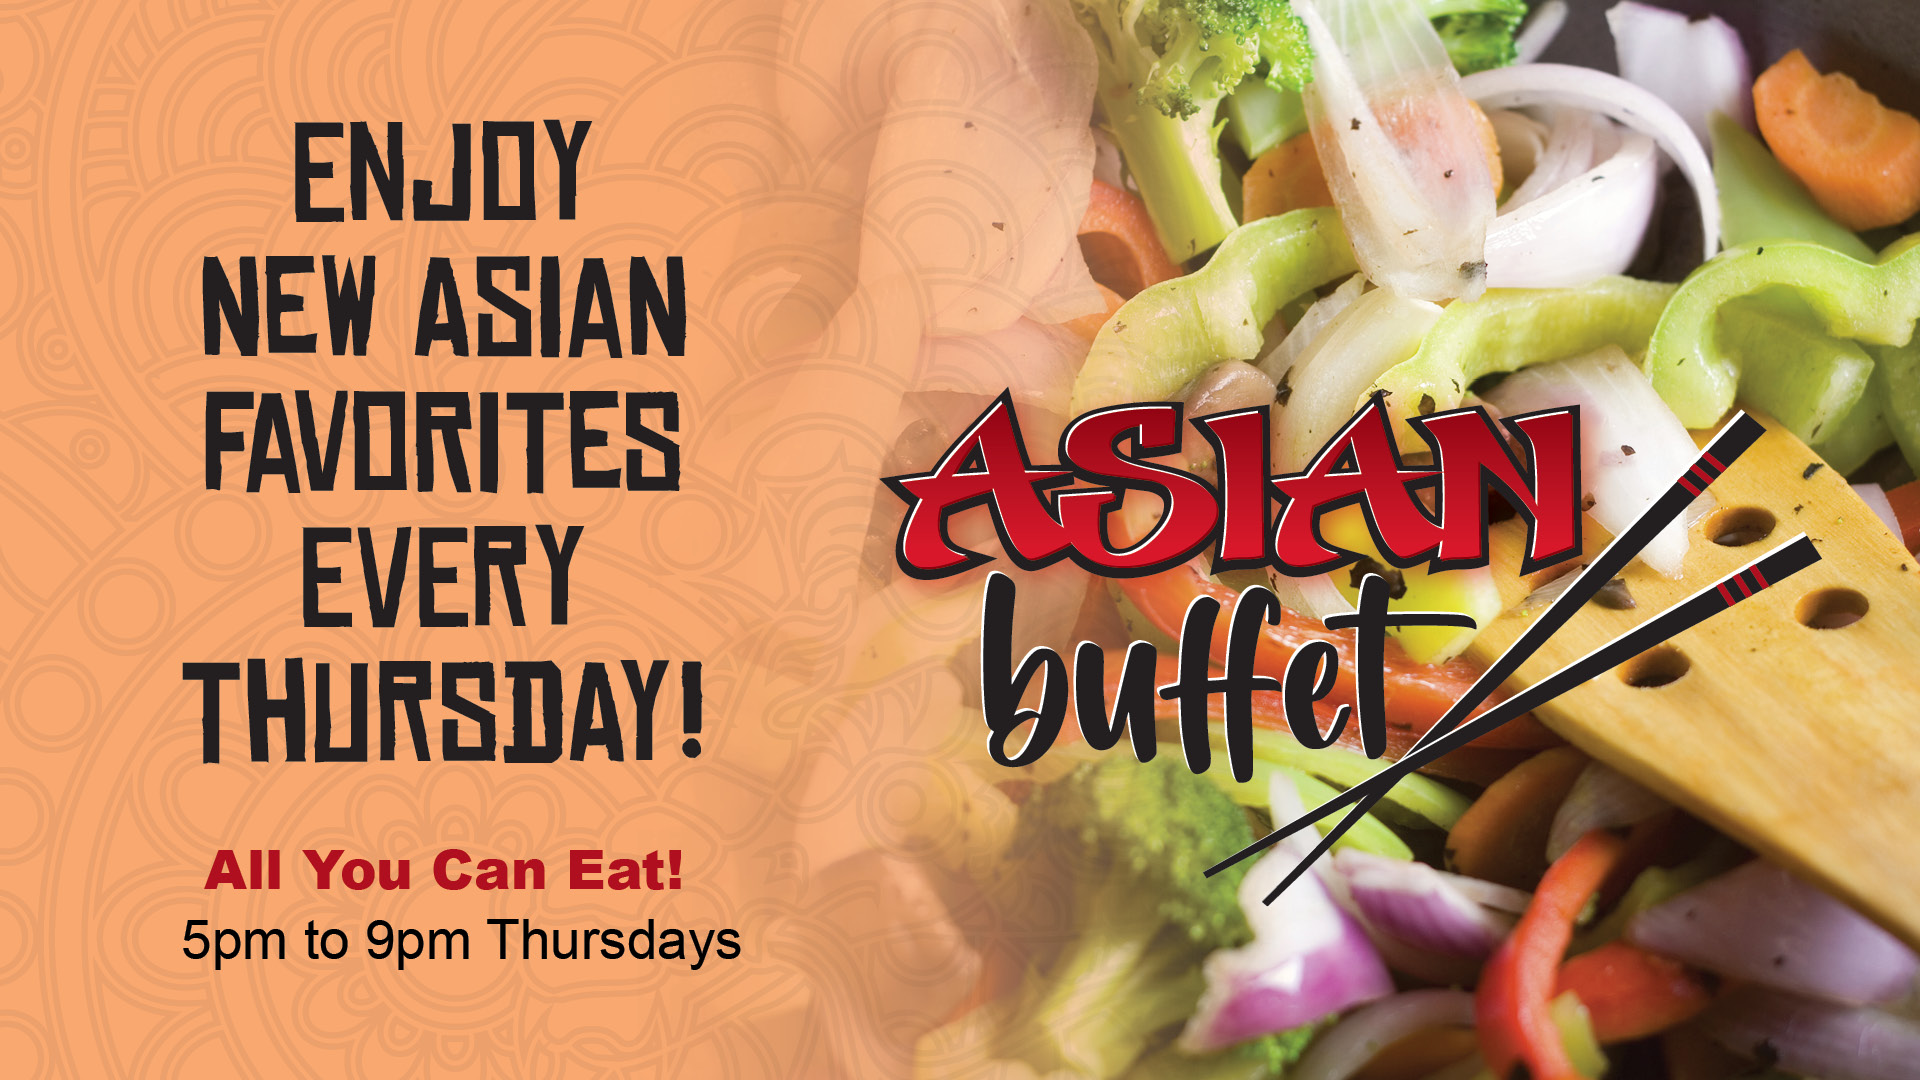 Asian buffet - enjoy new Asian favorites every Thursday! All you can eat! 5pm to 9pm Thursdays